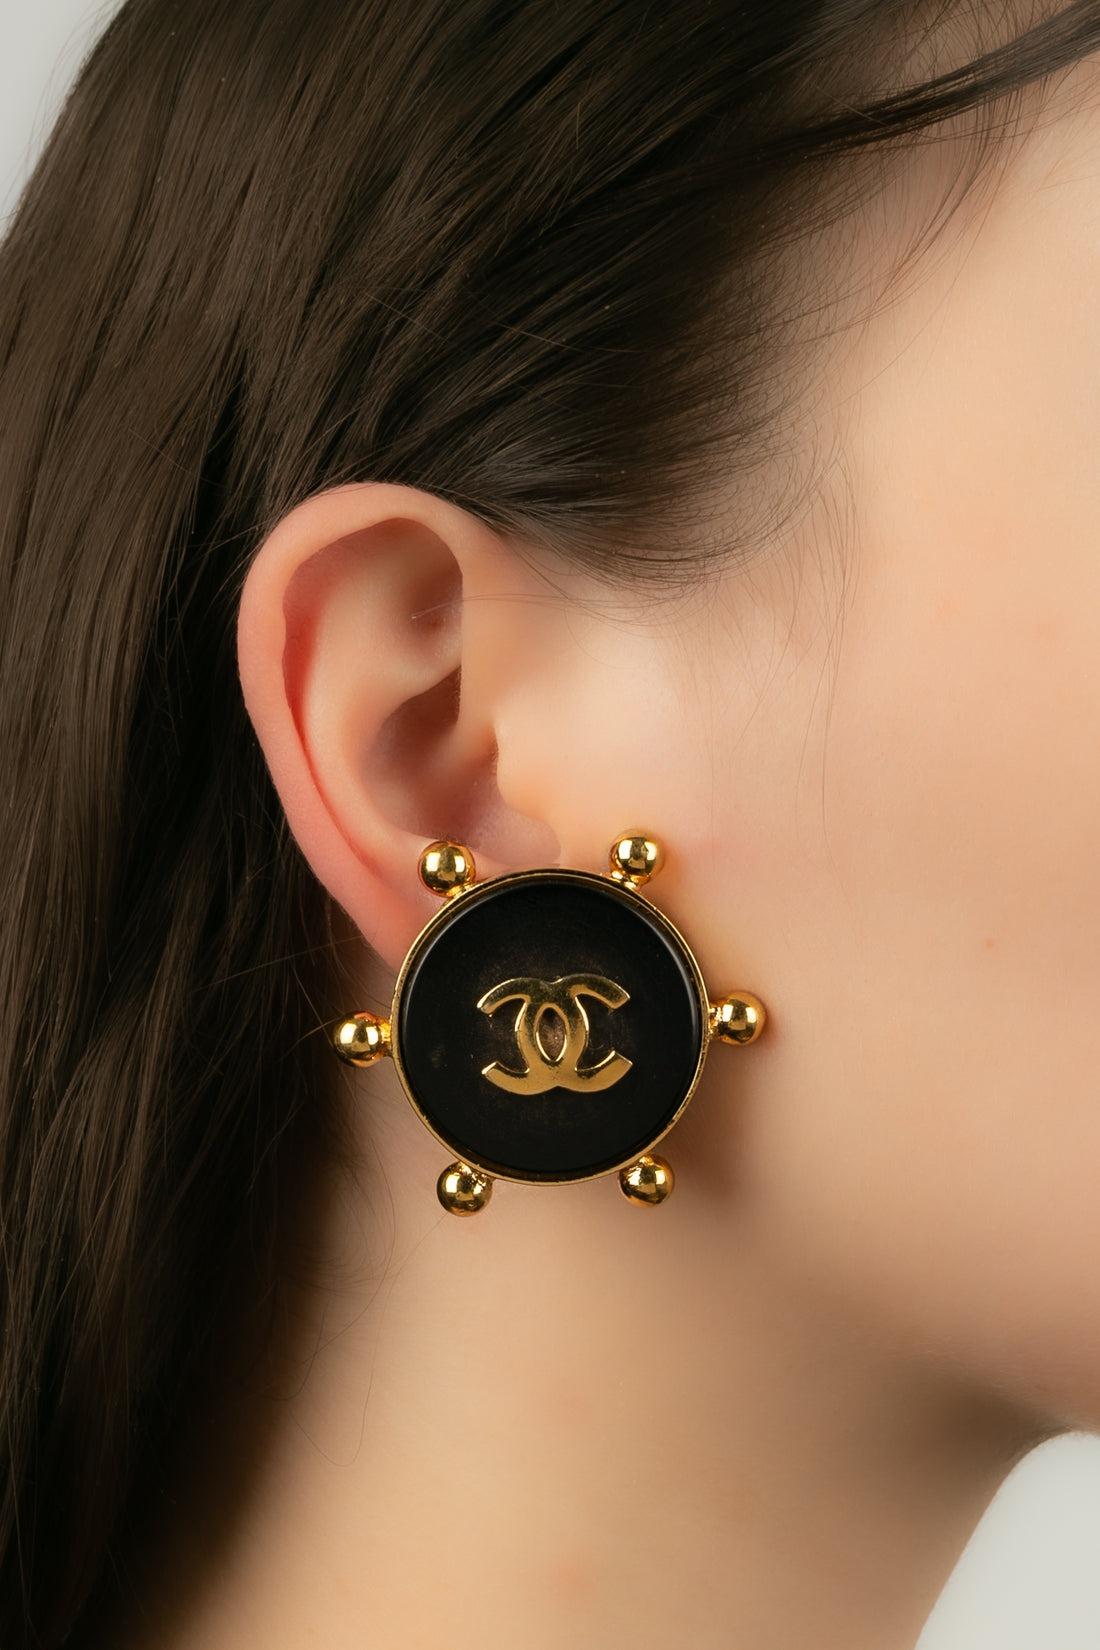 Chanel - Earrings in golden metal and black bakelite.

Additional information:
Condition: Very good condition
Dimensions: Circumference: 4 cm

Seller Reference: BOB18